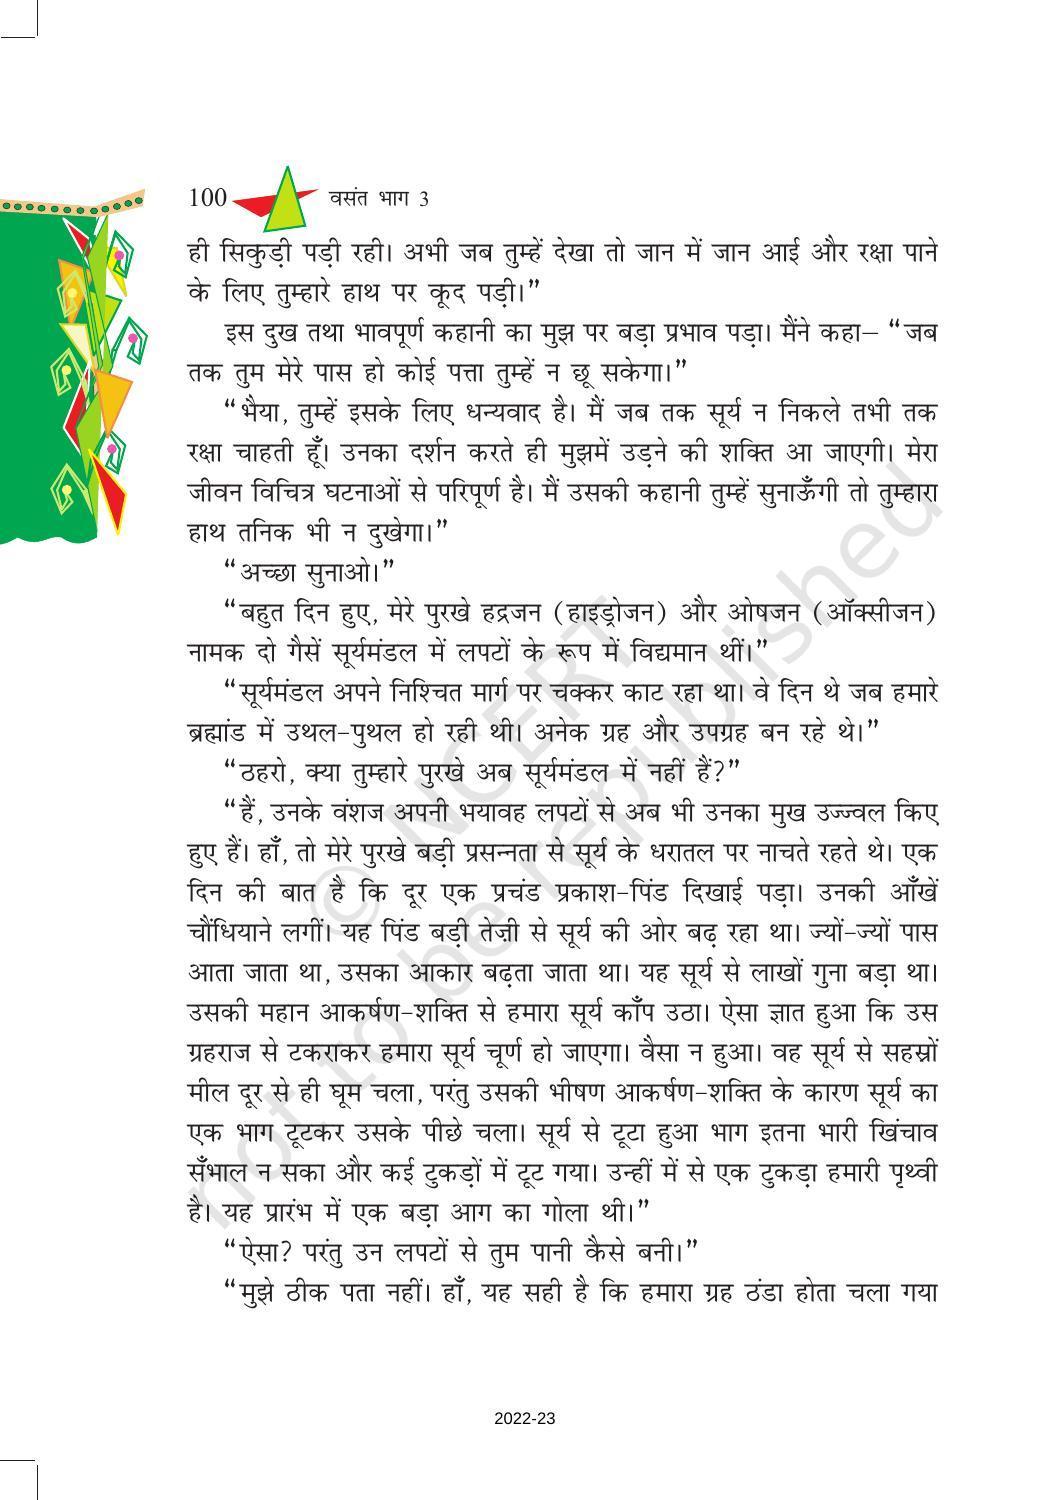 NCERT Book for Class 8 Hindi Vasant Chapter 16 पानी की कहानी - Page 3